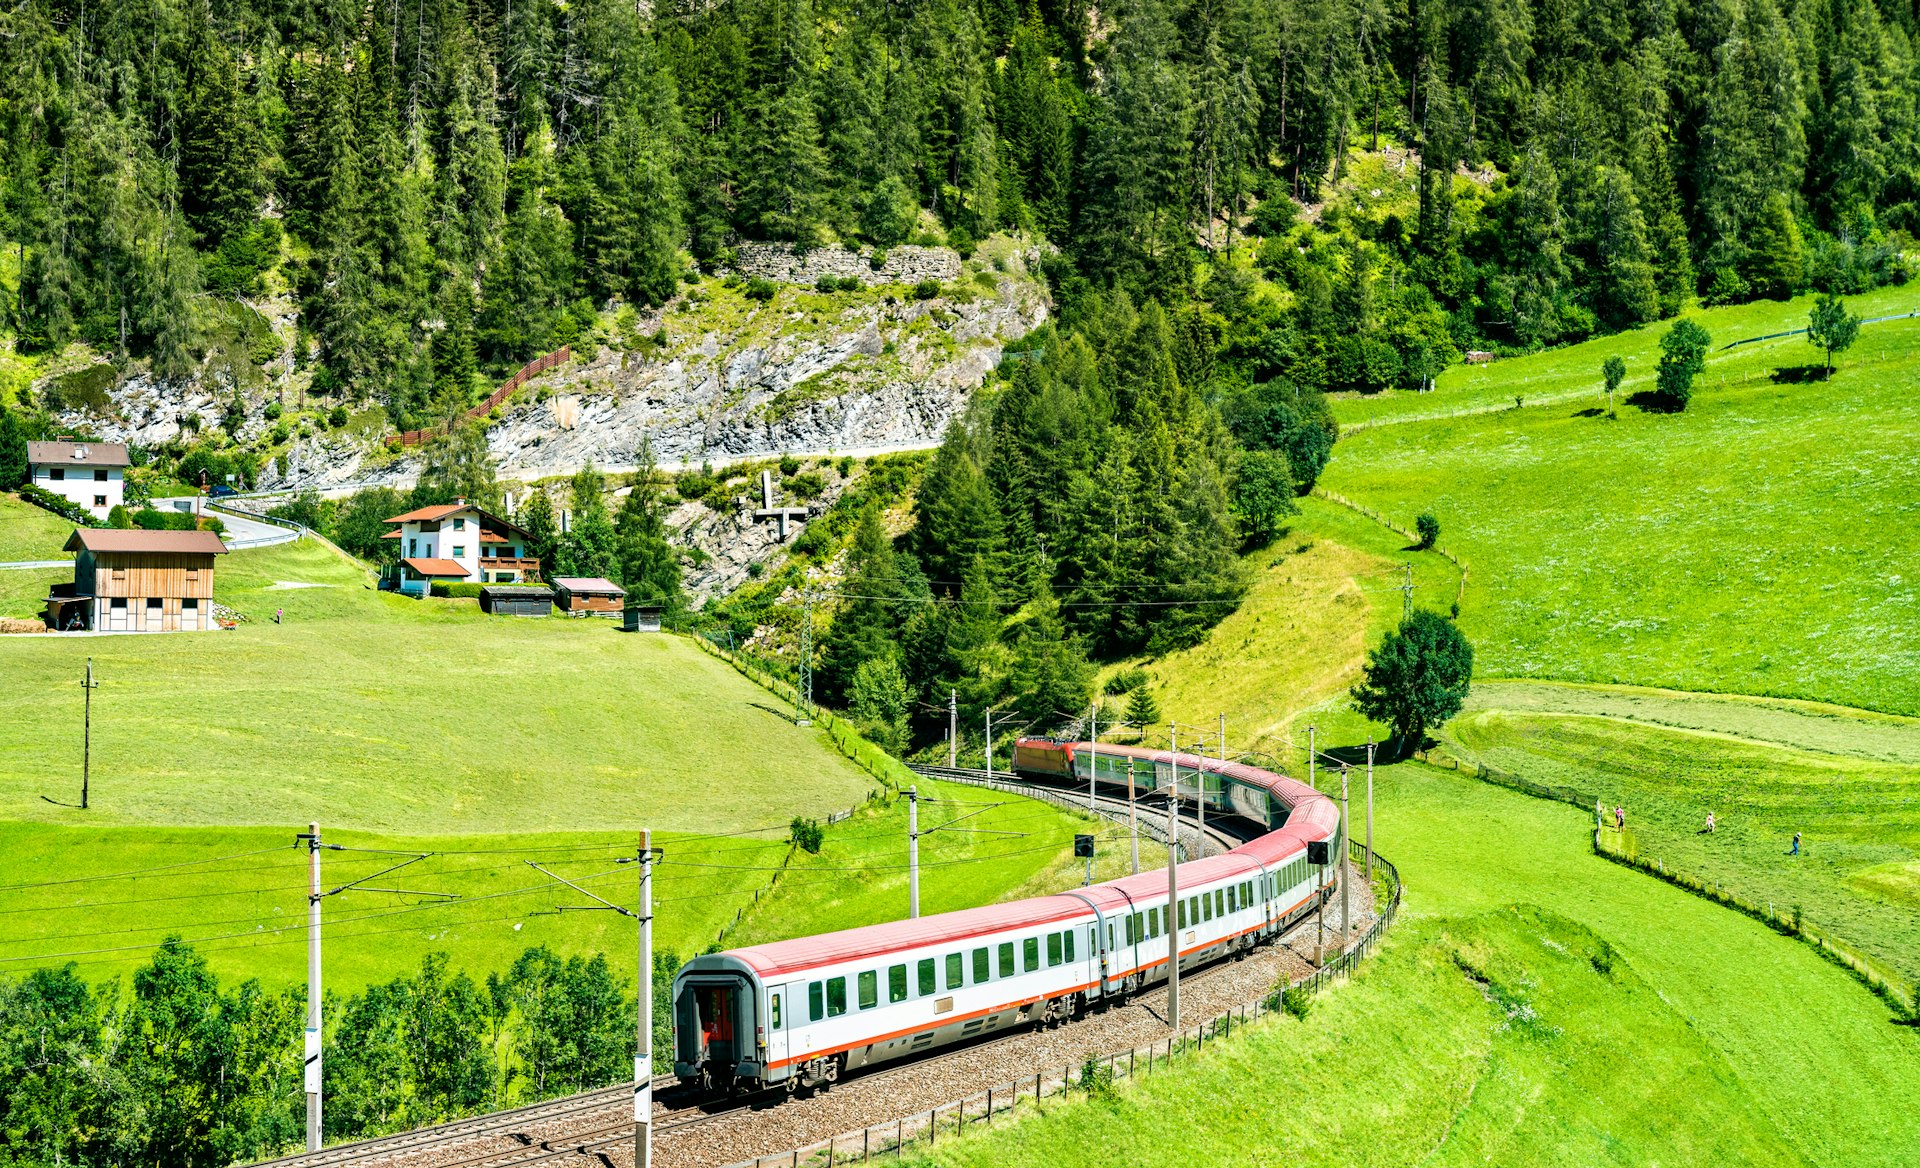 A passenger train on the Brenner Railway in the Austrian Alps